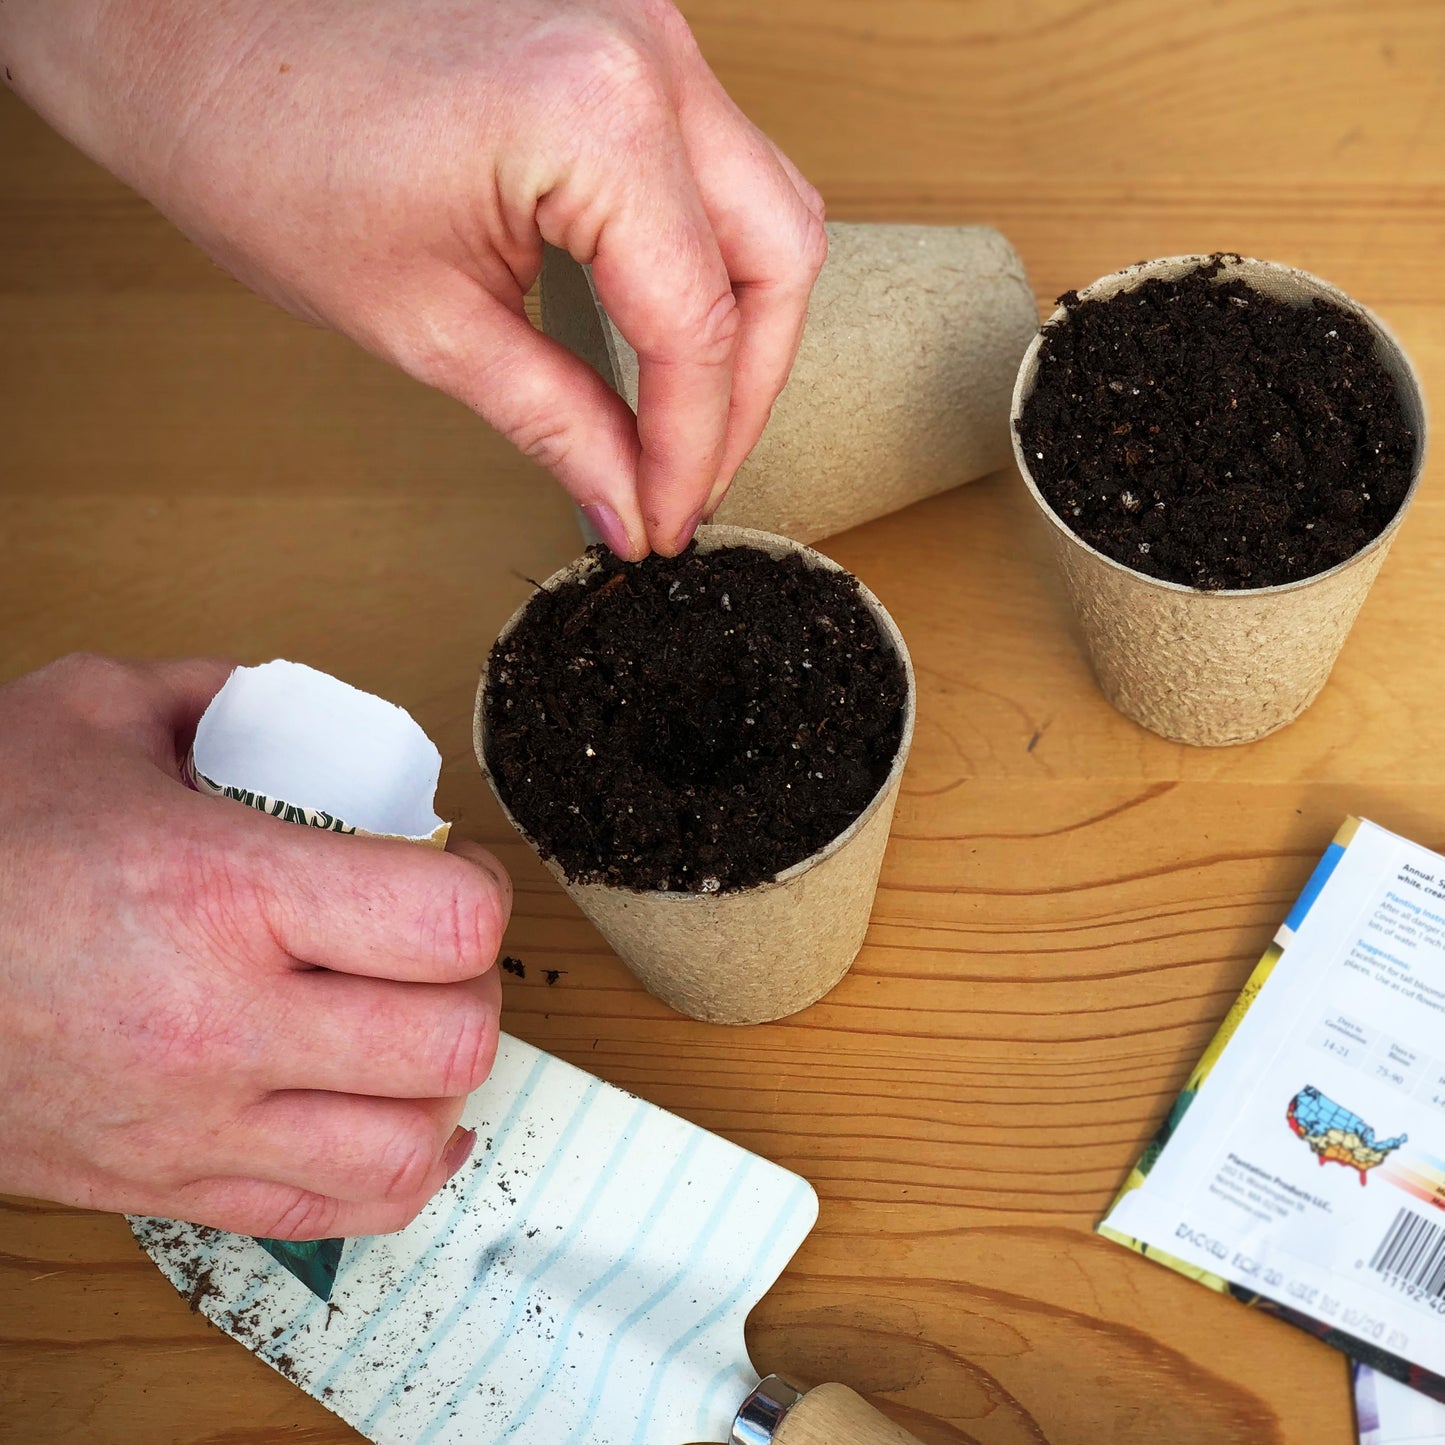 Start your Walla Walla Sweet Onion seeds in biodegradable peat pots or paper pots.